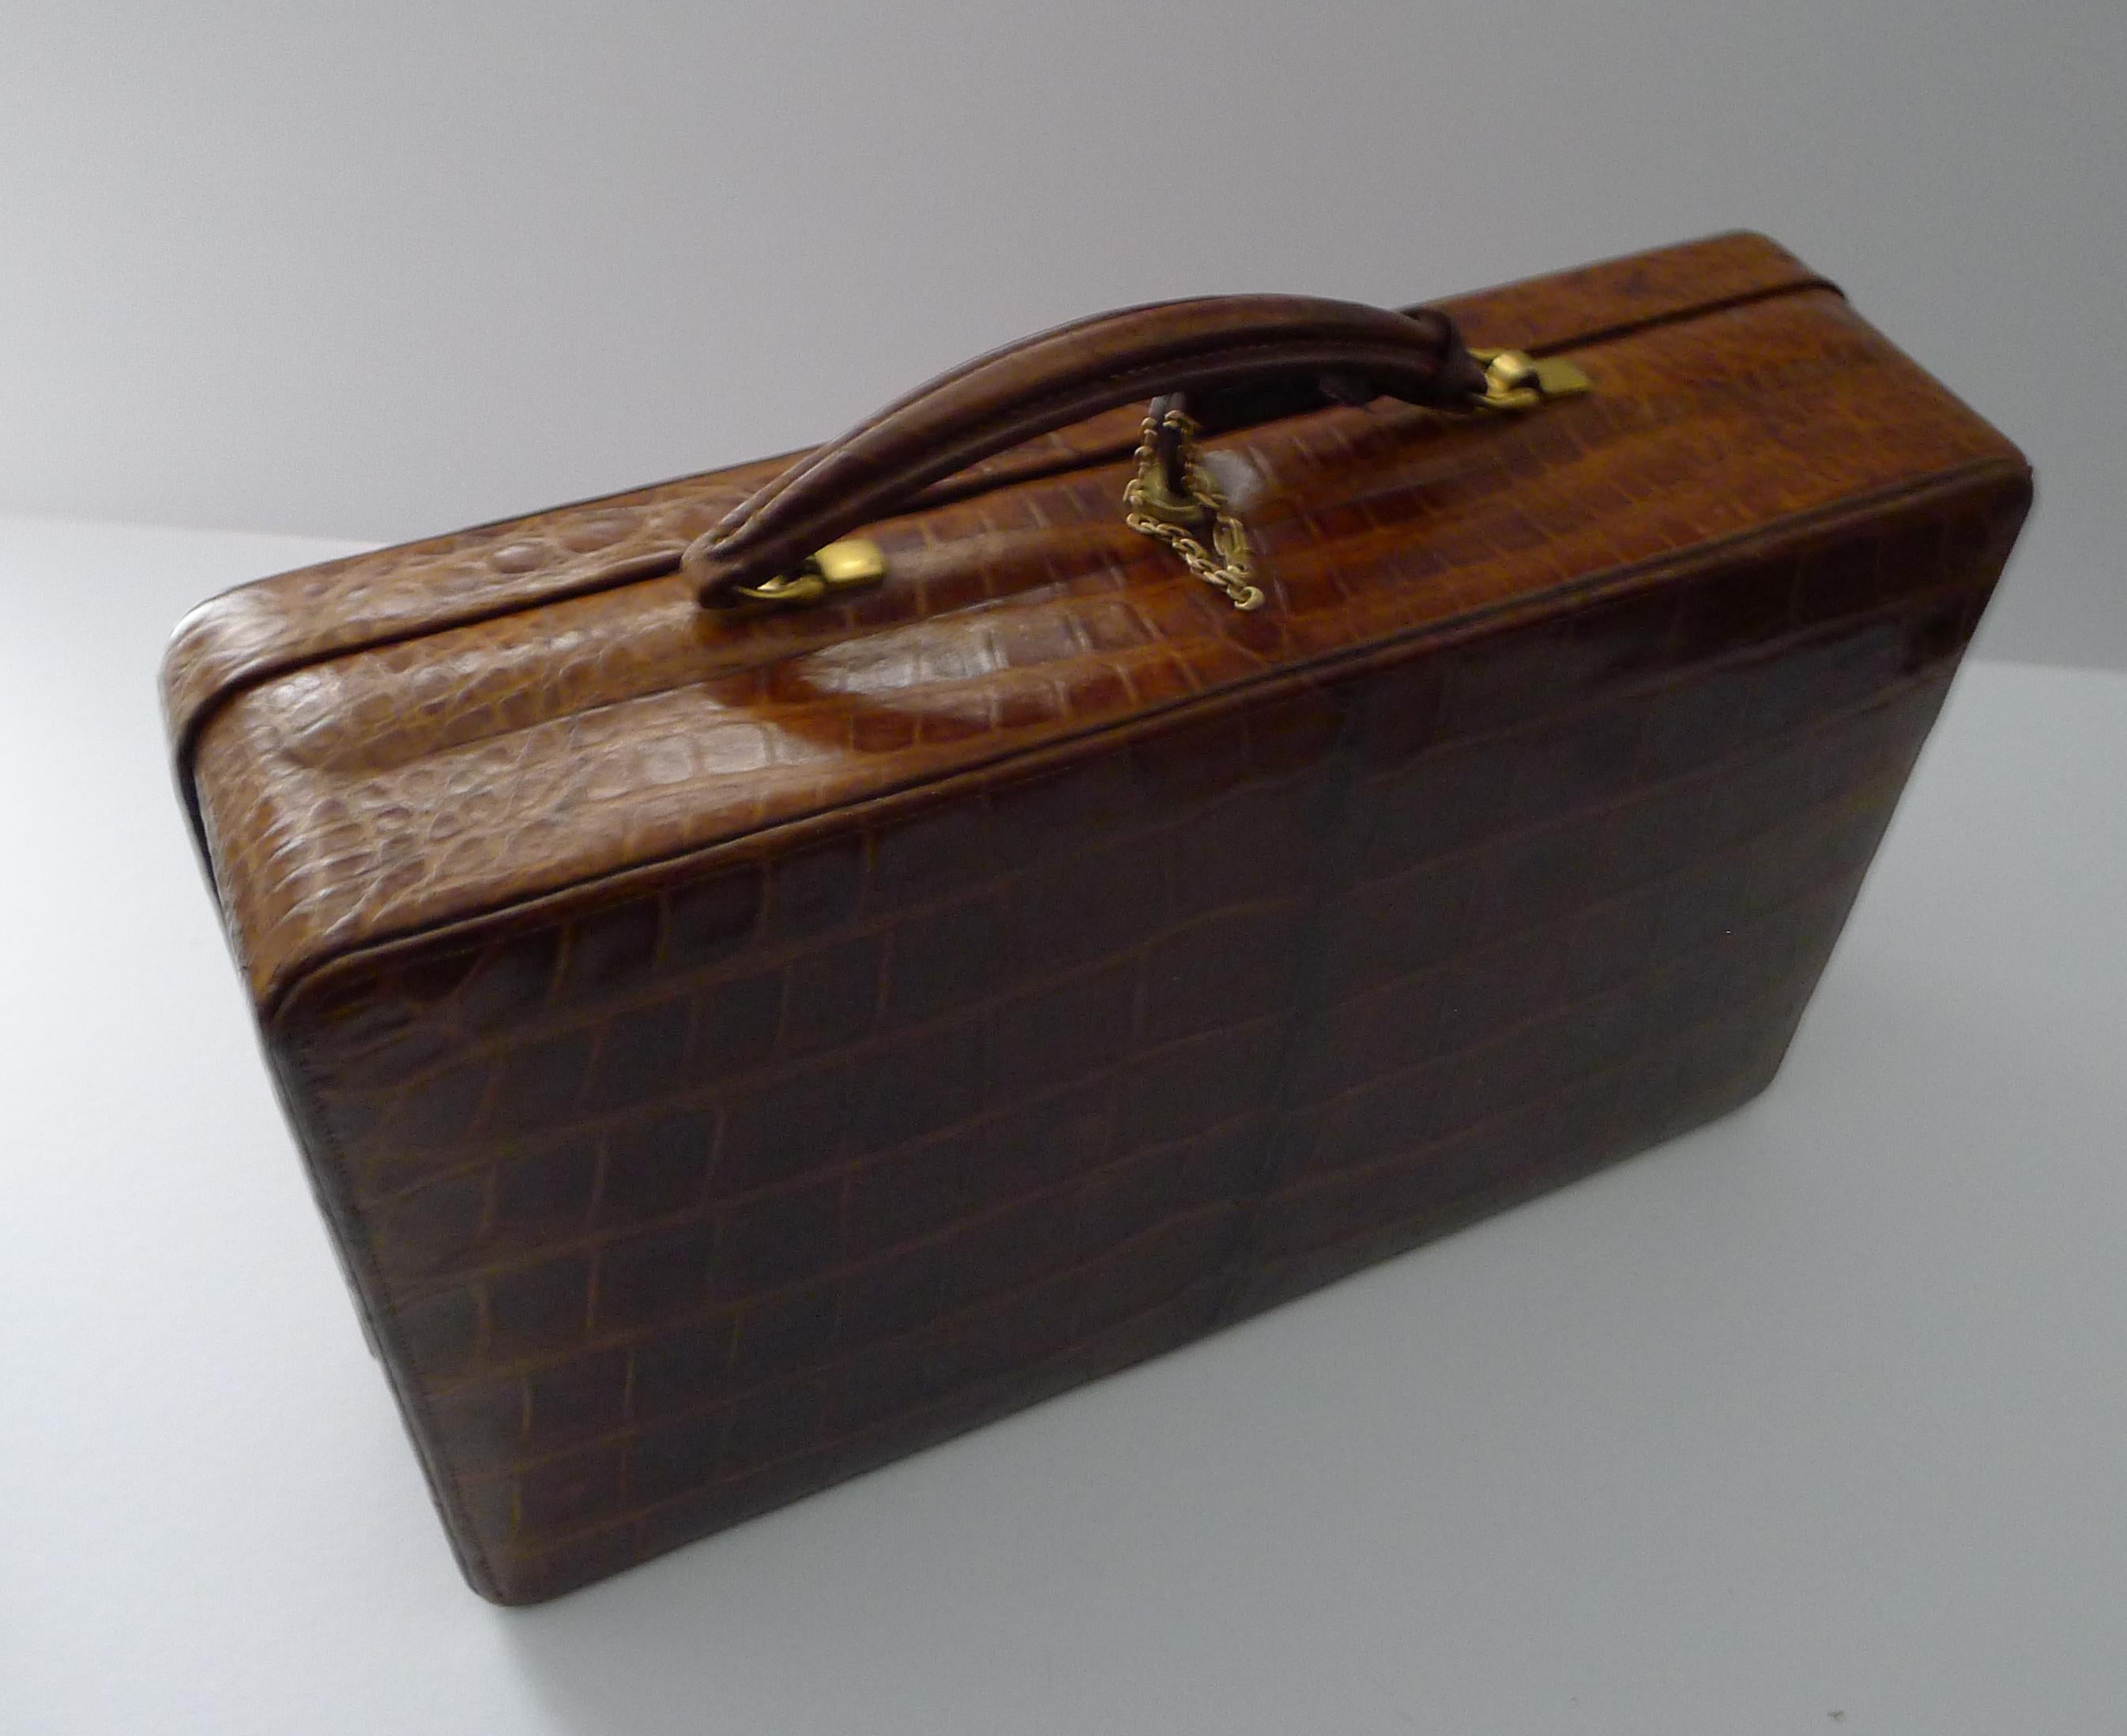 A stunning antique English Jewelry case made by the top notch, Mappin & Webb of London.

The case is covered in luxurious cognac coloured Crocodile, dating c.1910.  The case comes with a working 